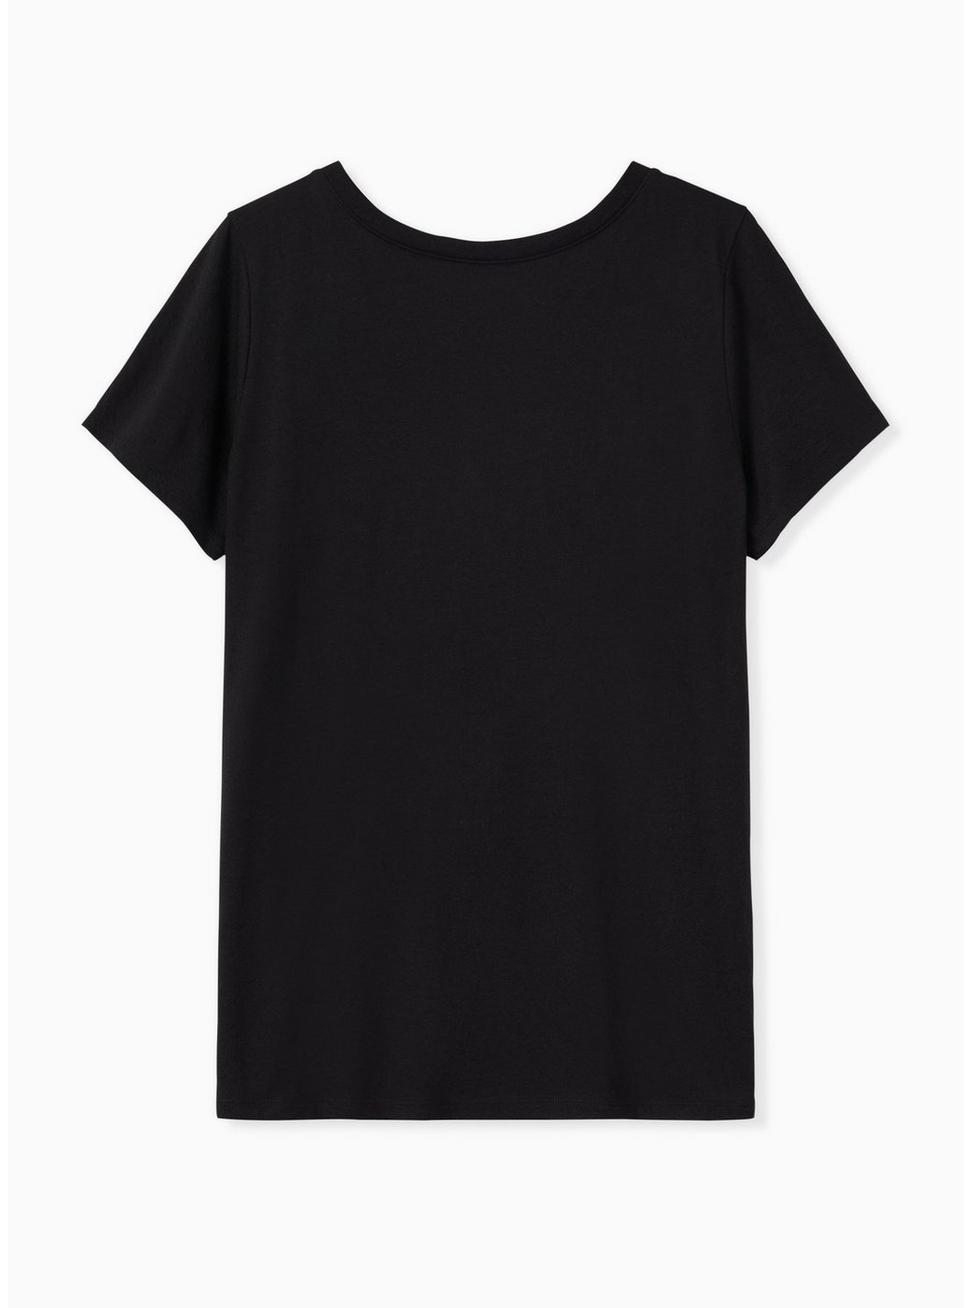 Plus Size - Save The Drama For Your Mama Black V-Neck Tee - Torrid